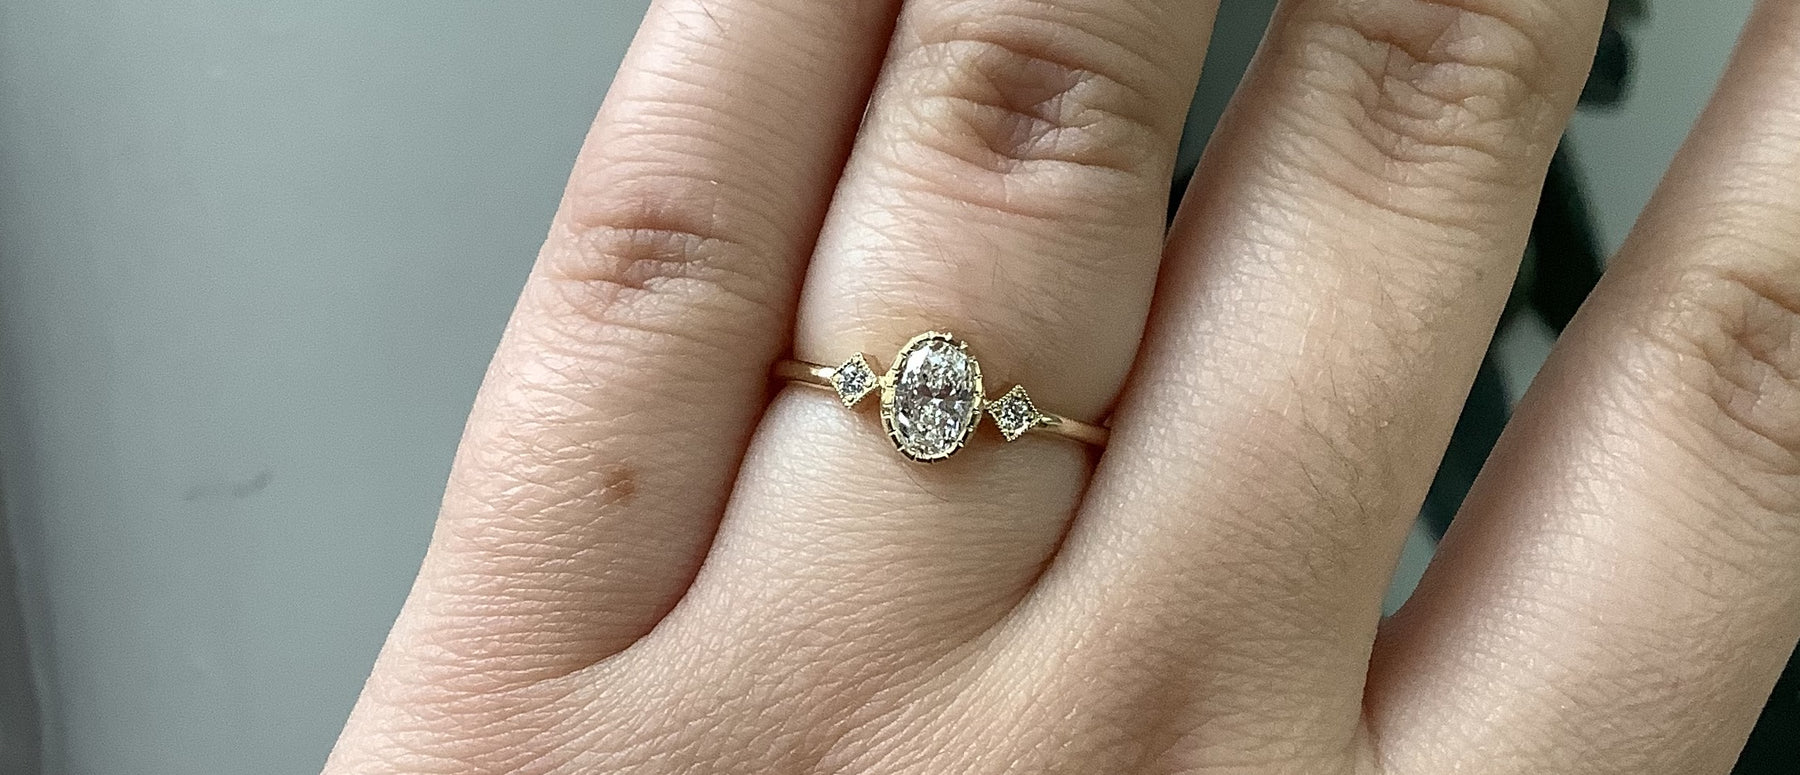 14k yellow gold custom engagement ring with oval white diamond center stone and deco diamond squares